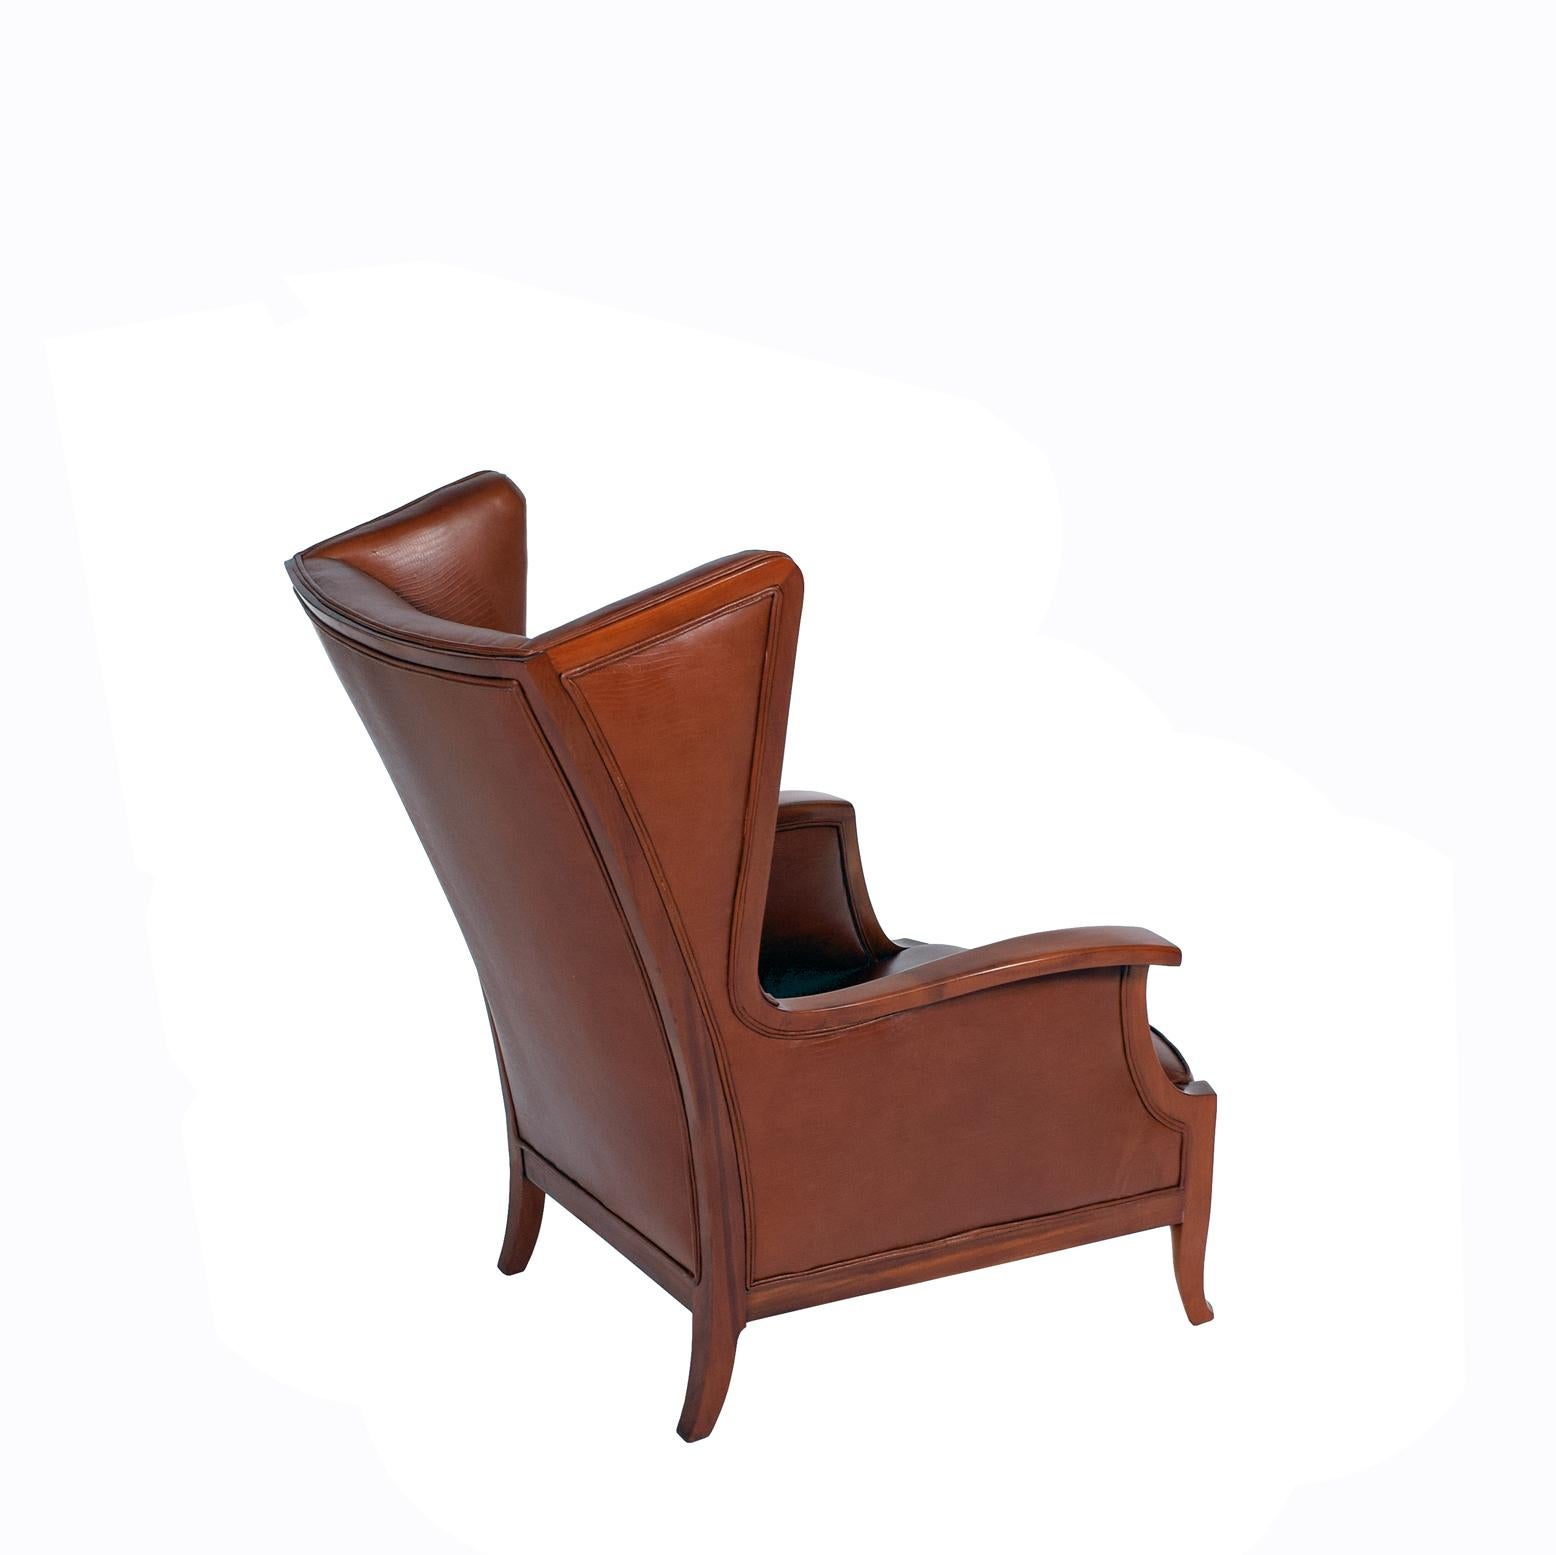 Solid mahogany frame, sides seat and back with reddish patinated Italian leather probably made by Frts Henningsen.